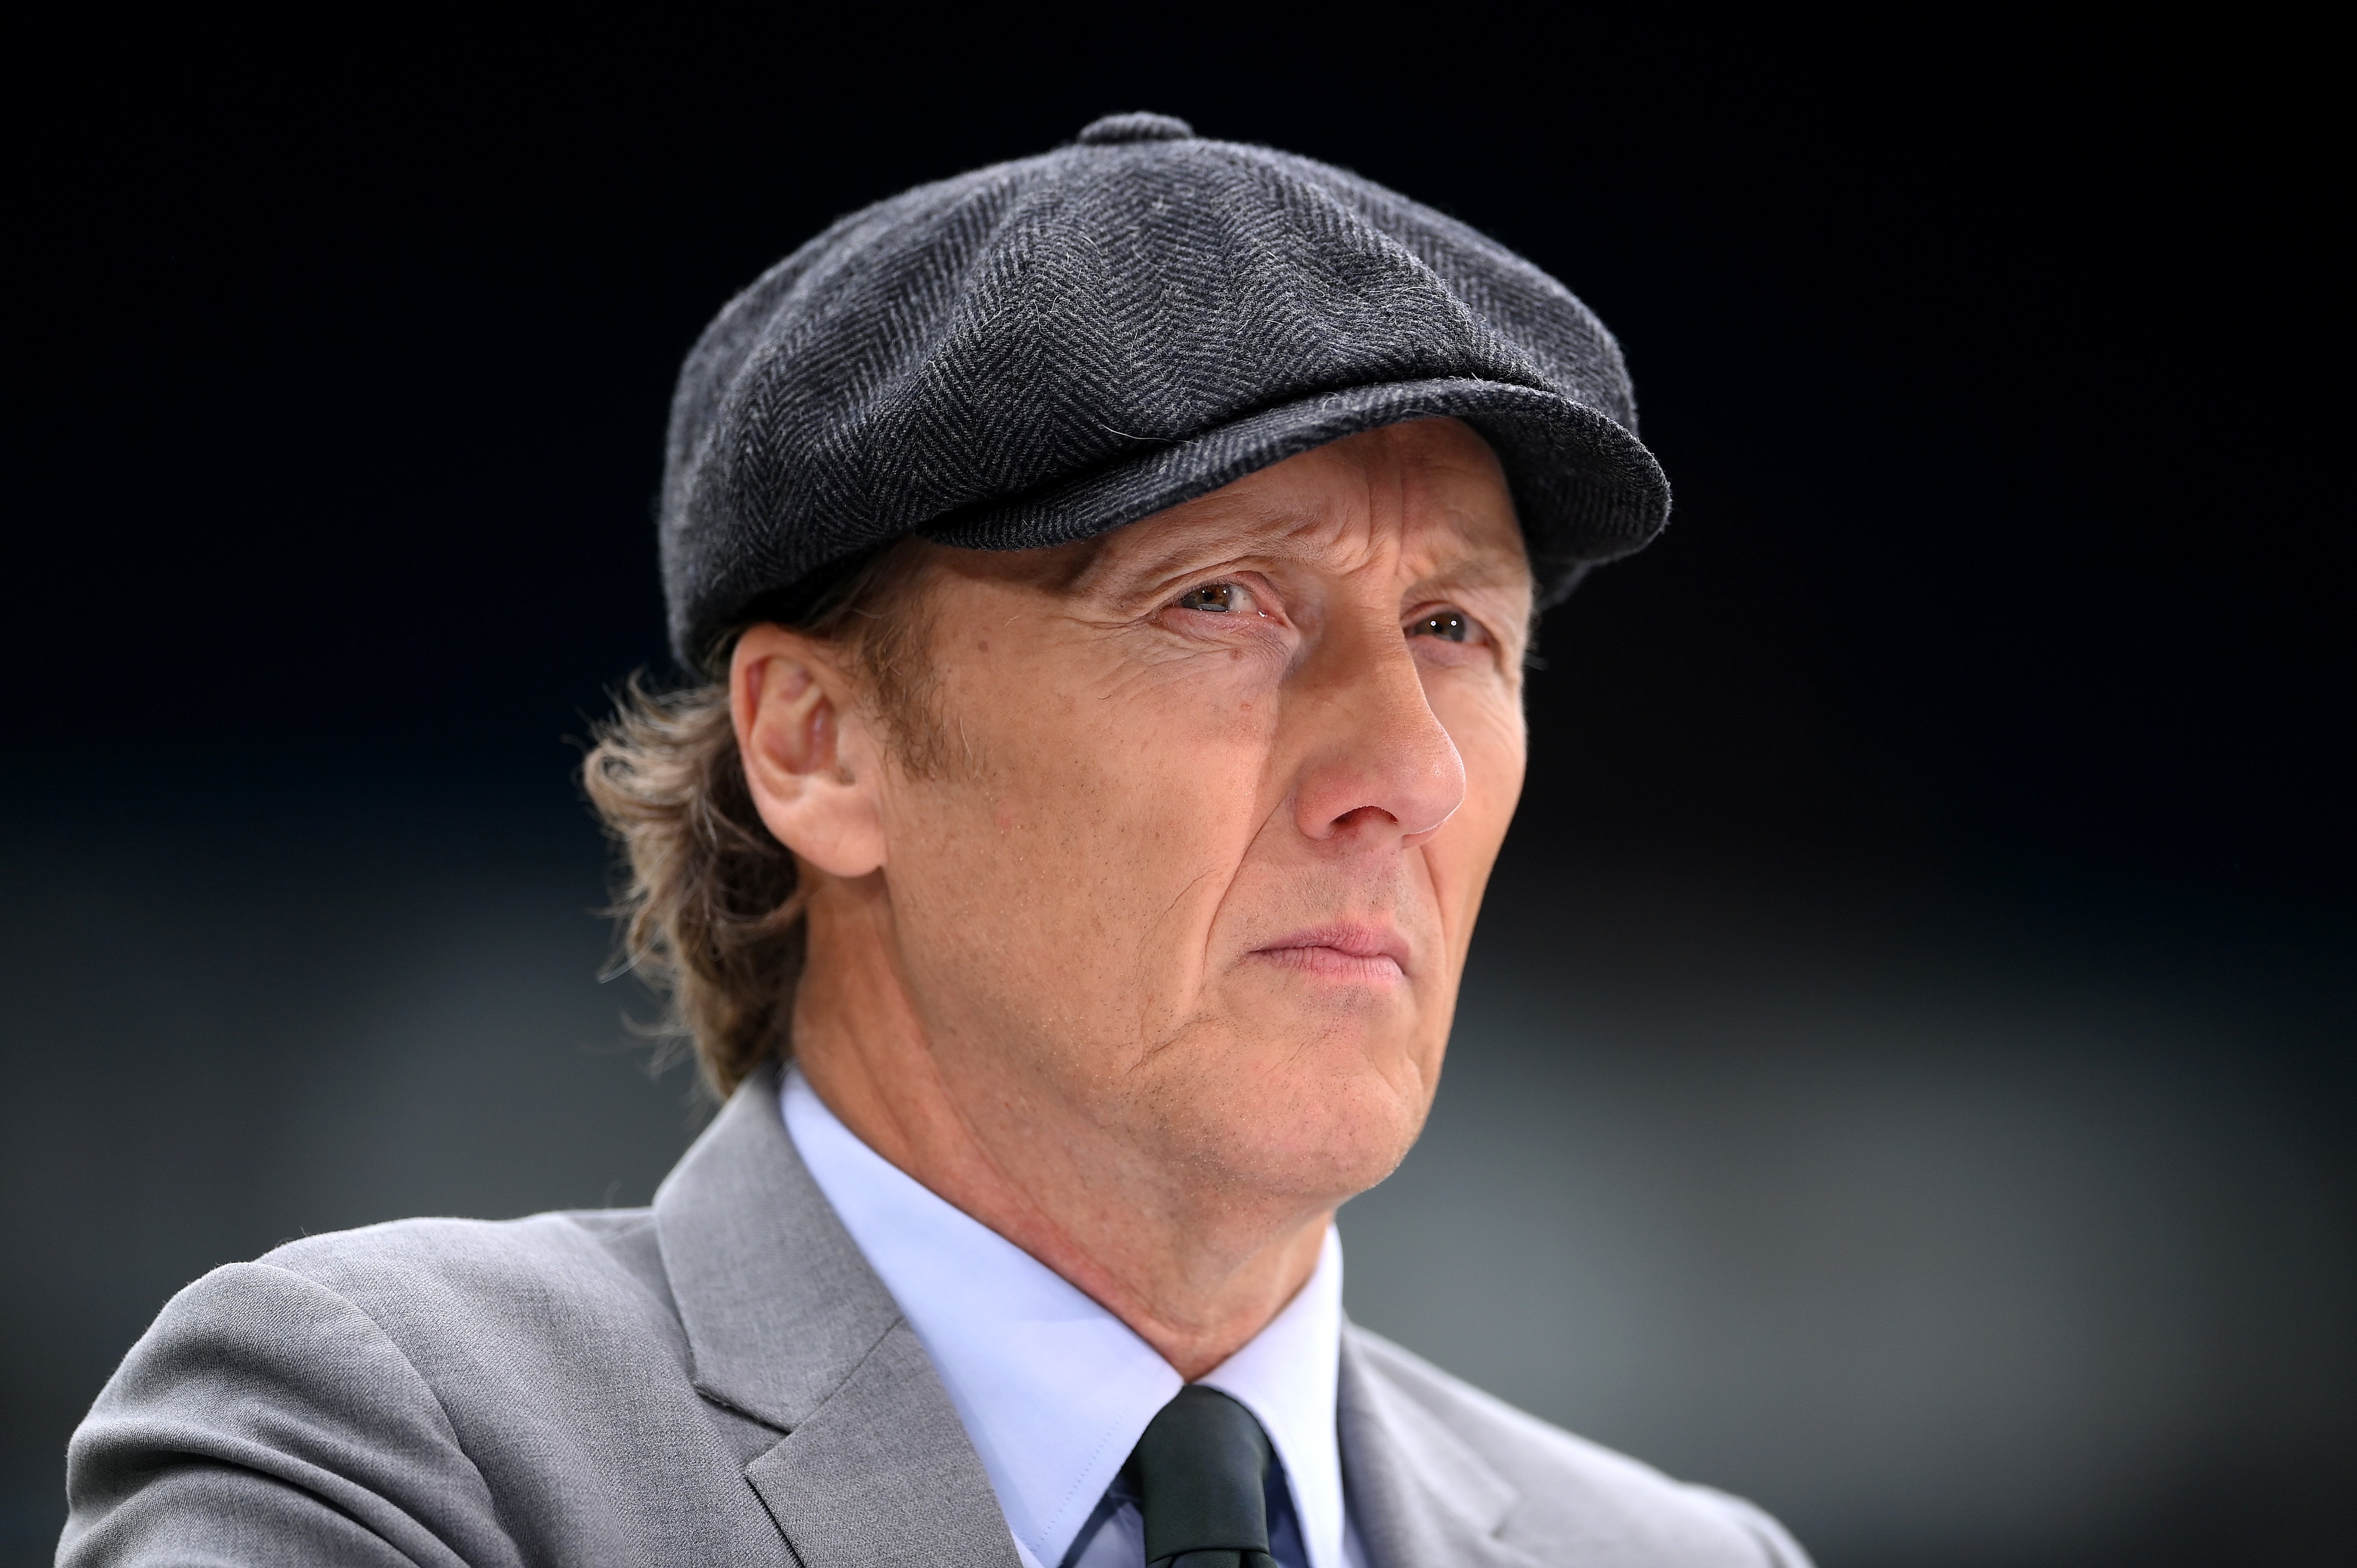 Former Arsenal defender Lee Dixon is now a pundit and commentator